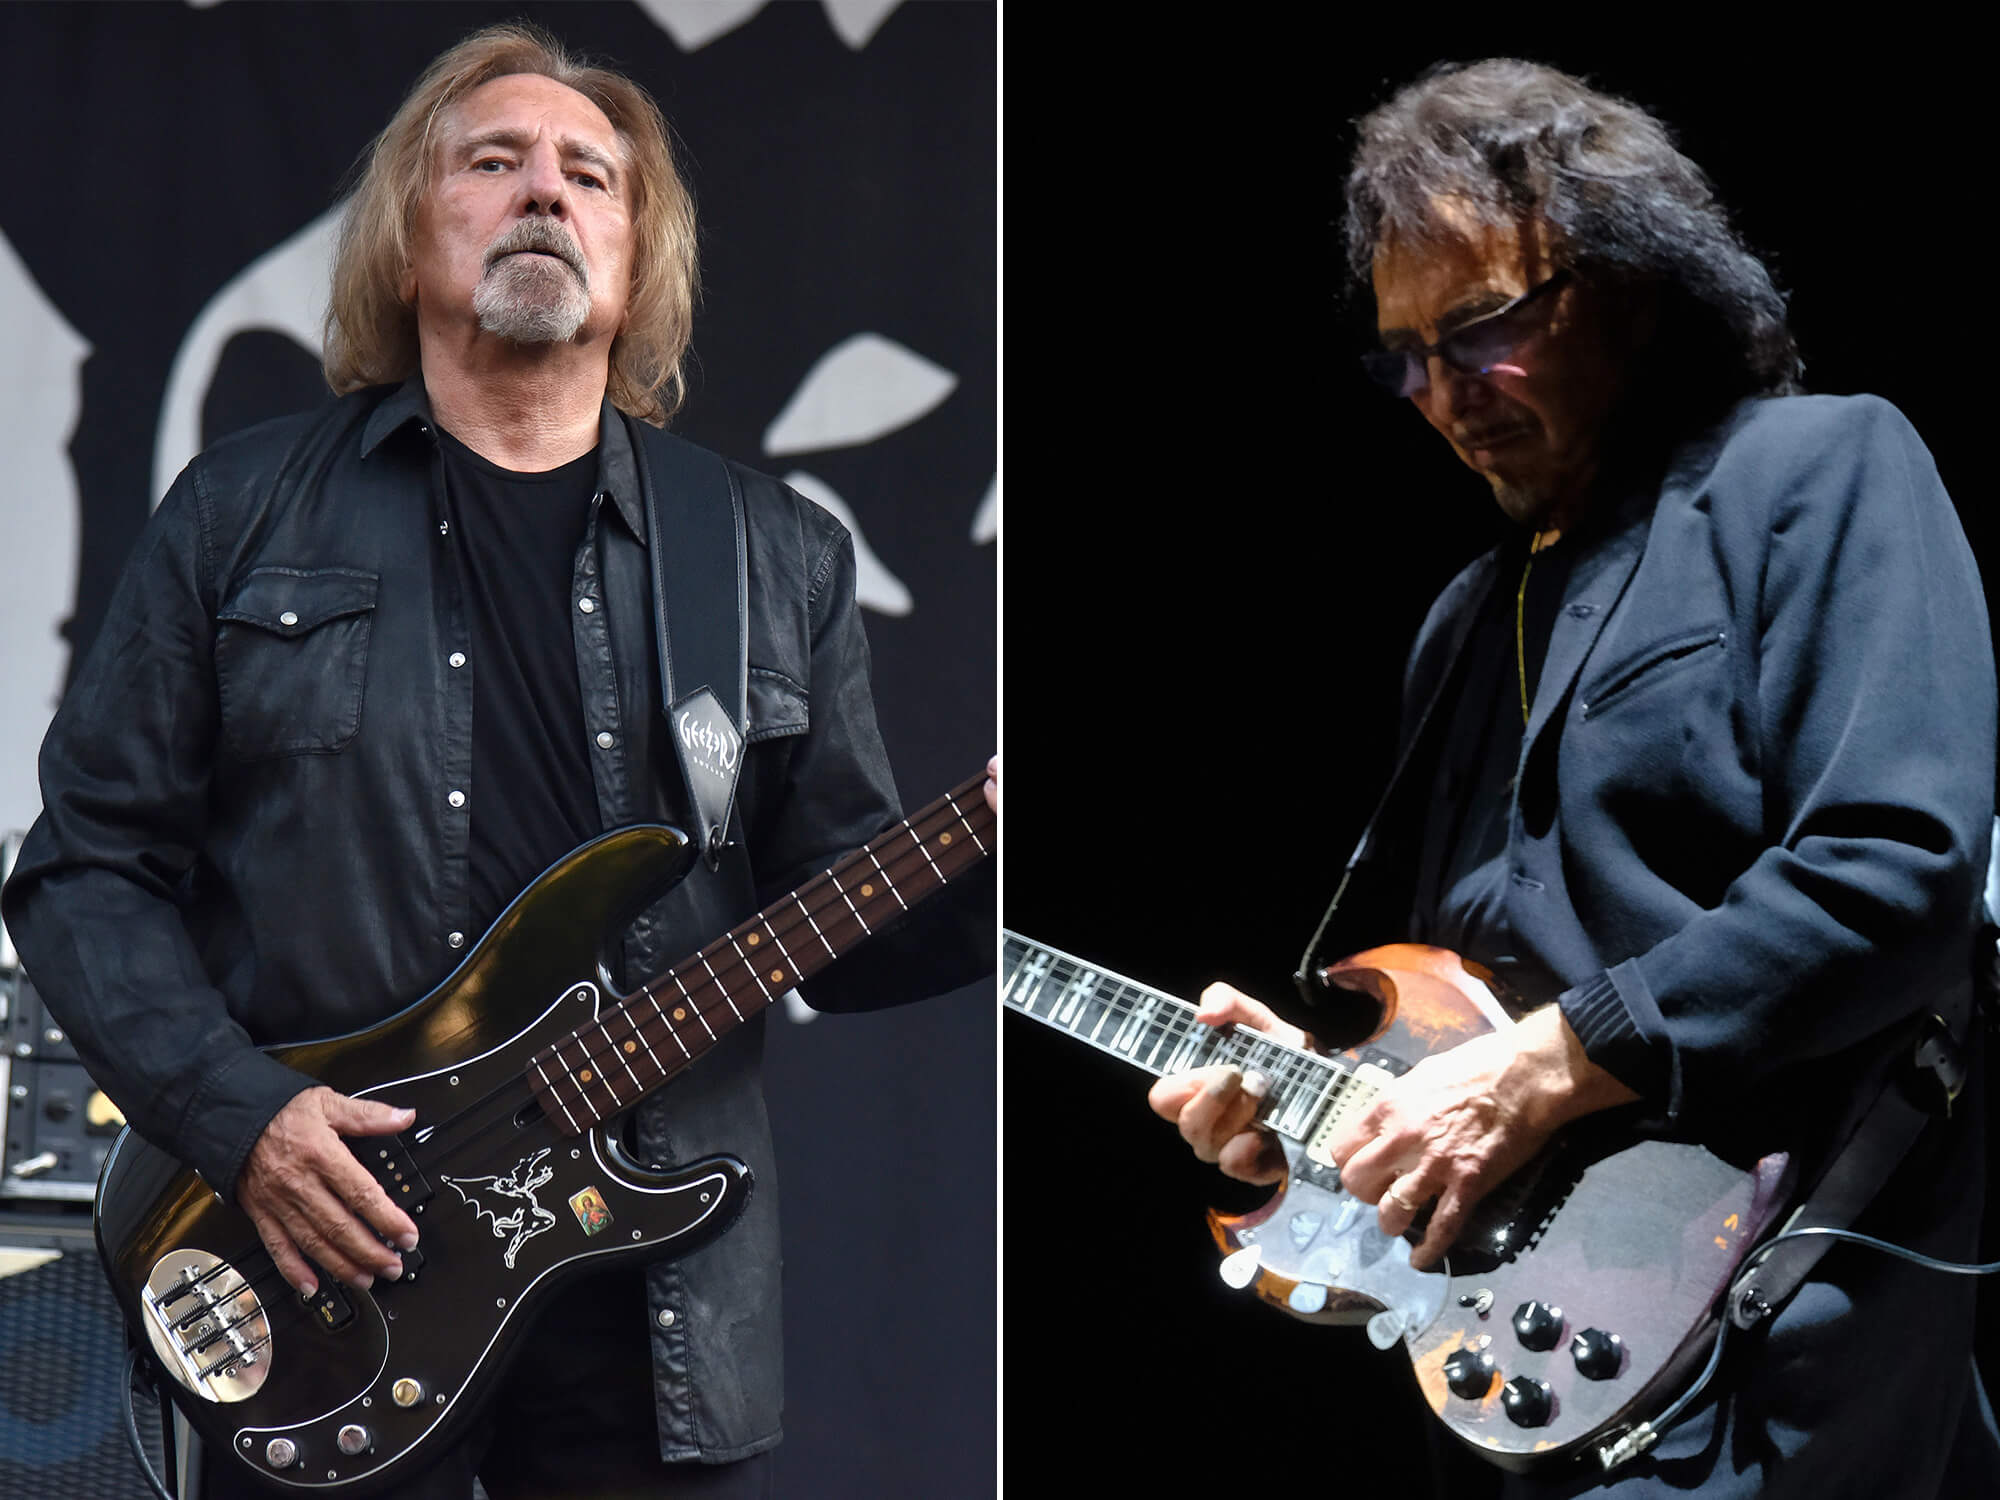 [L-R] Geezer Butler and Tony Iommi